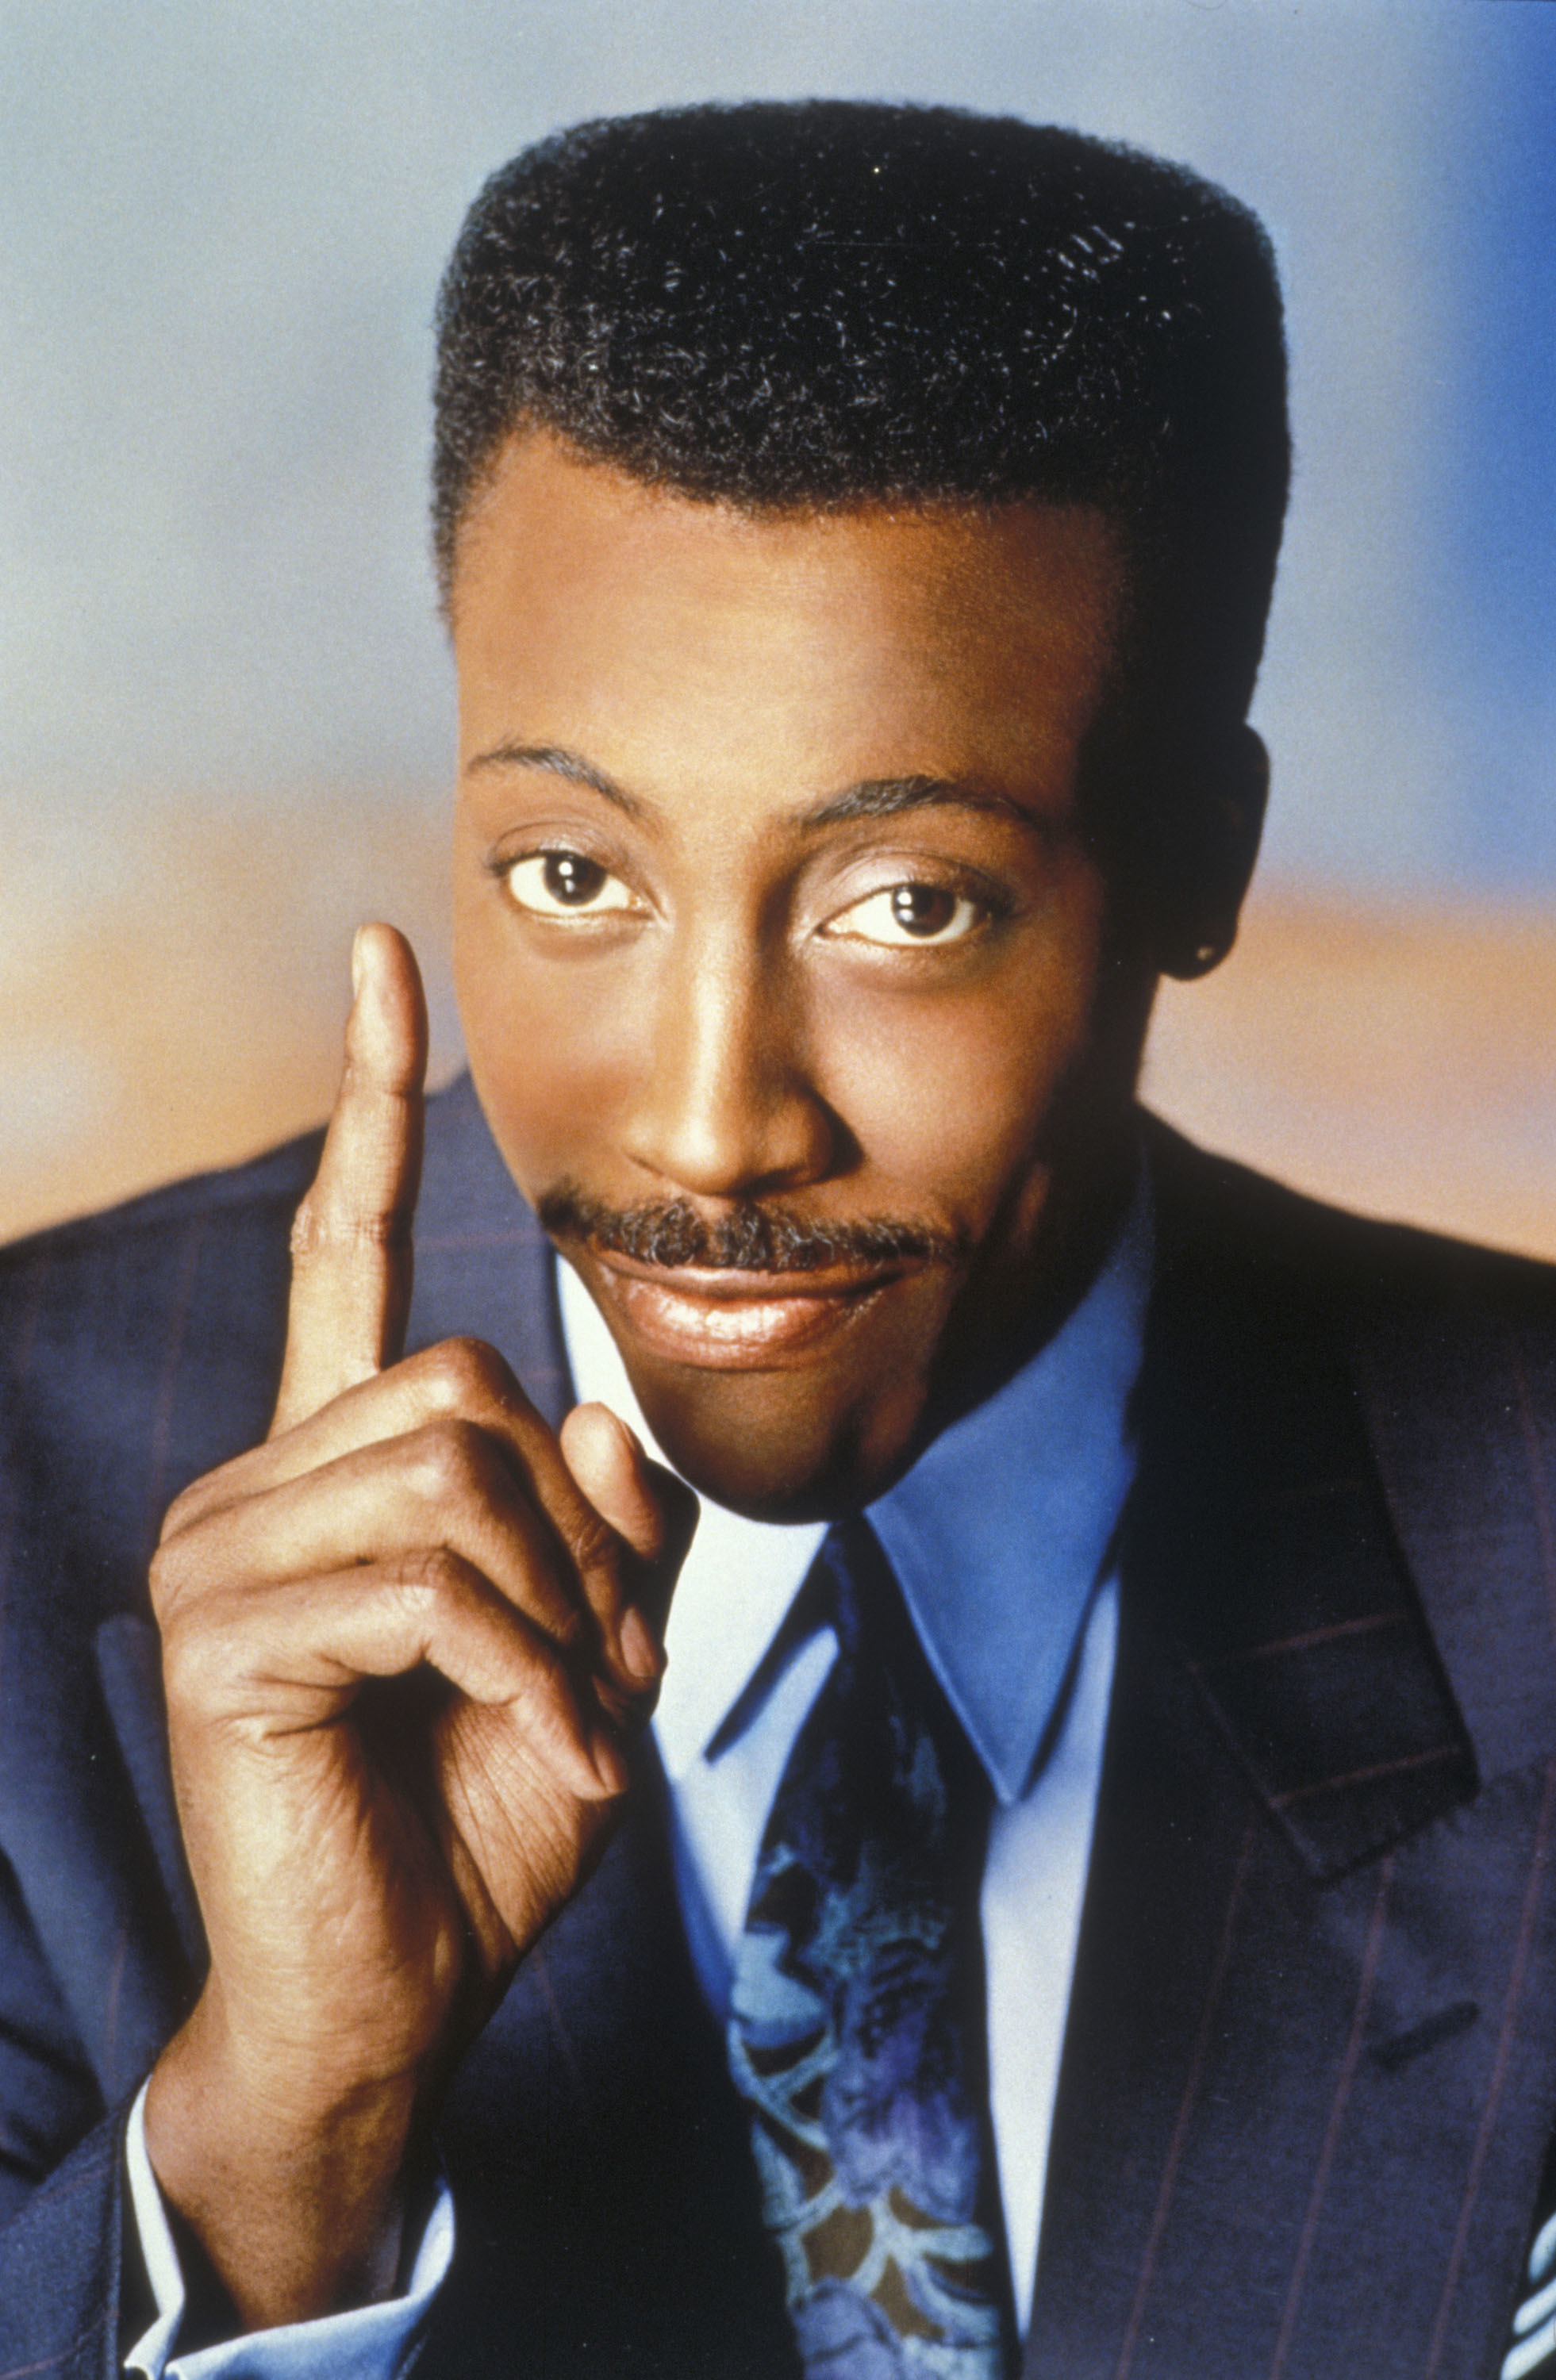 <p>In 1989, Arsenio Hall became the first Black late-night TV host when his program, "The Arsenio Hall Show," premiered. The series lasted for five seasons.</p>